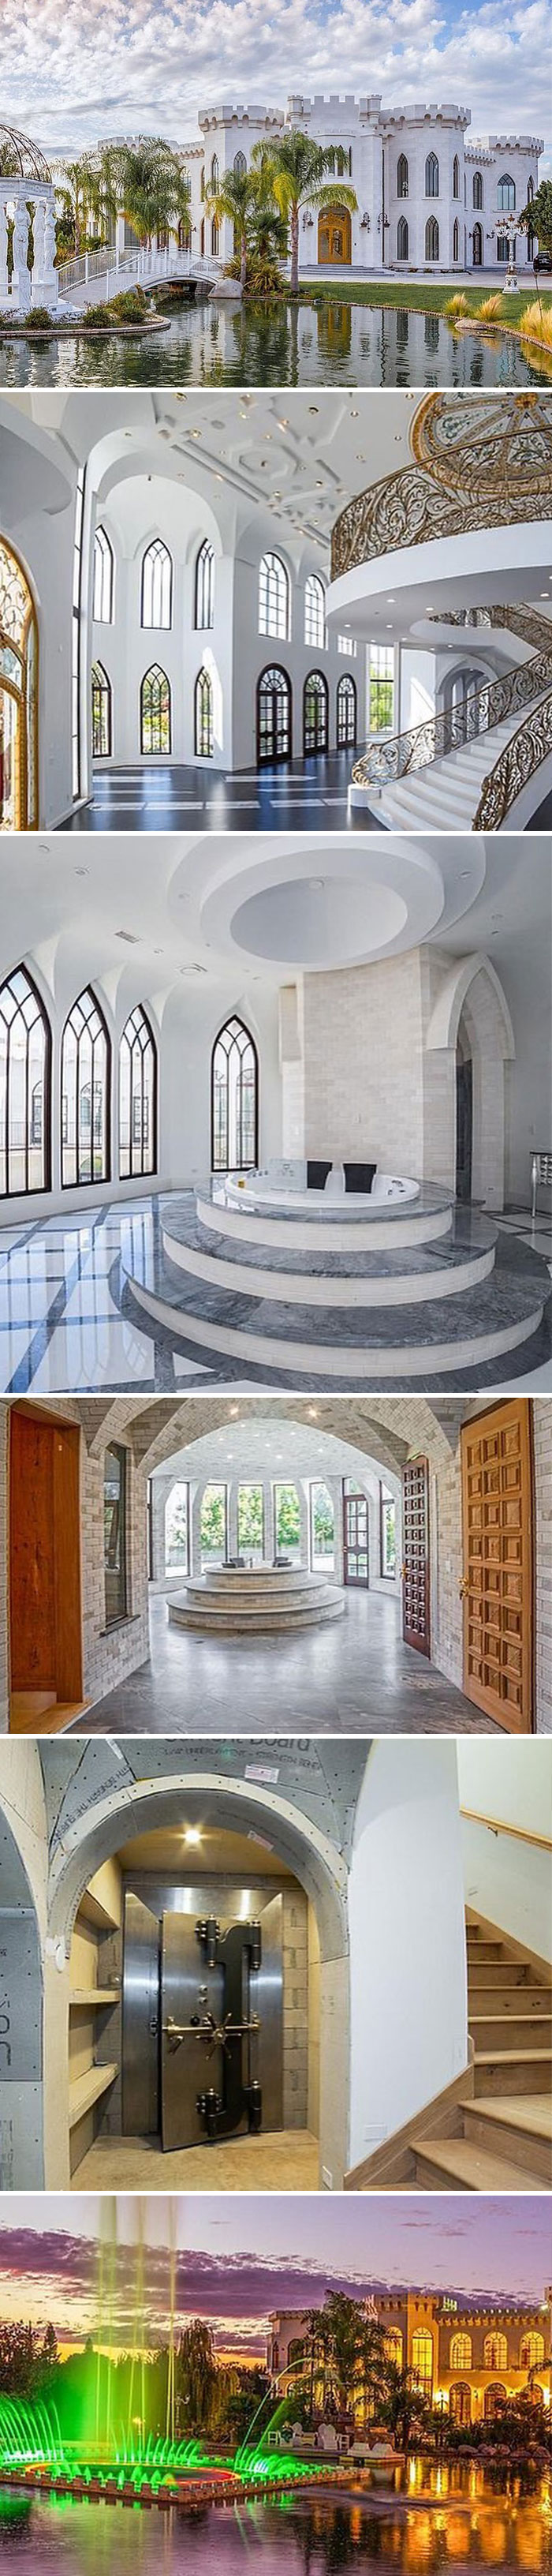 This Home Really Cares About Baths. $10,000,000